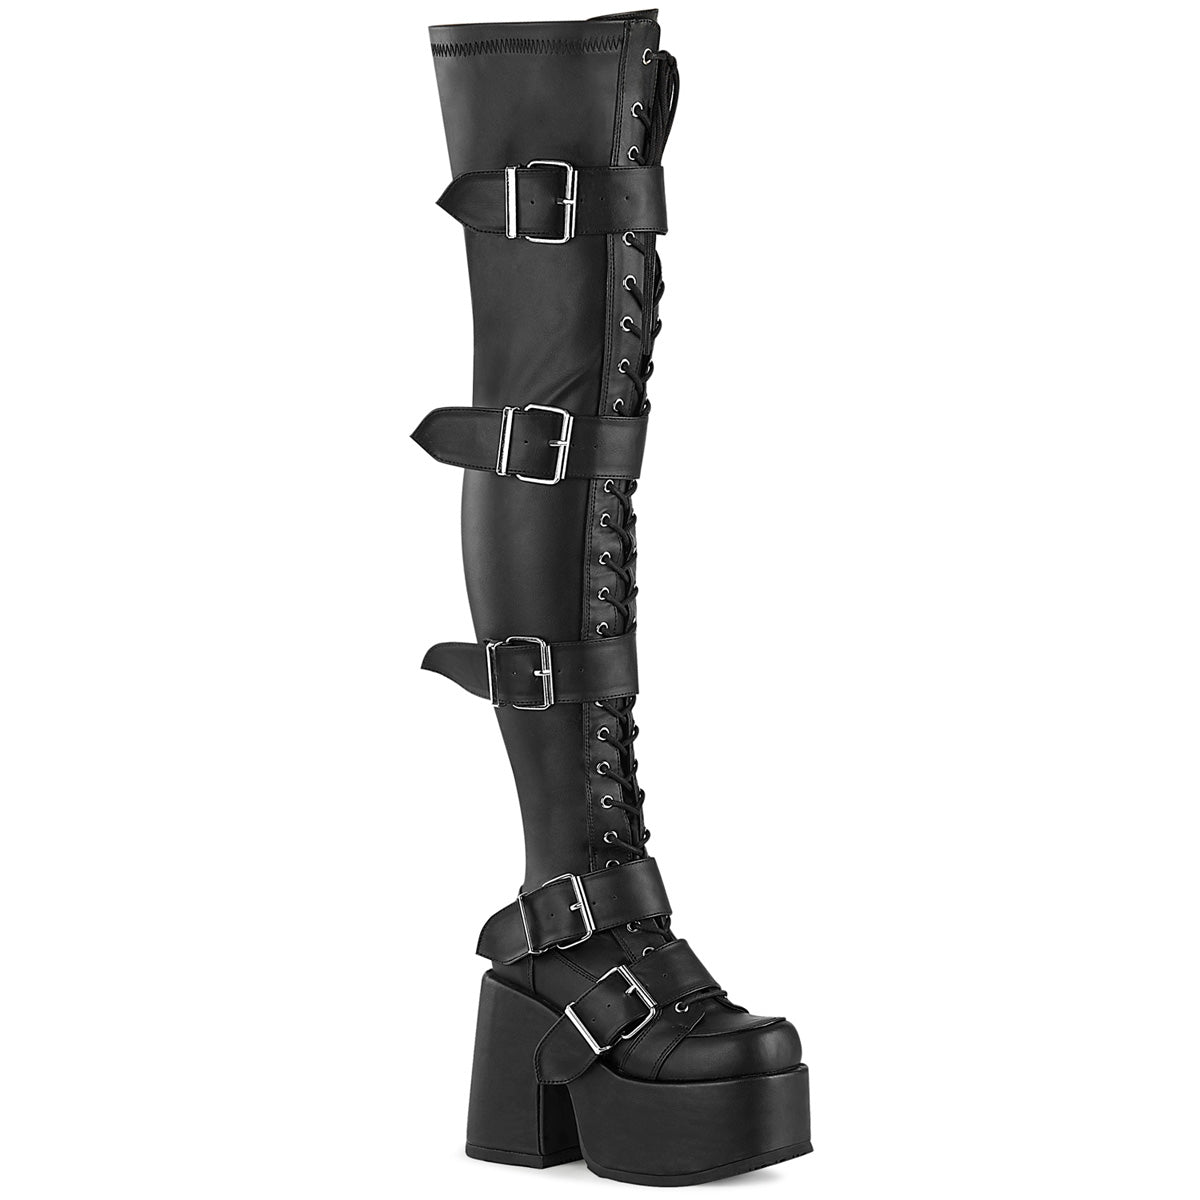 Too Fast | Demonia Camel 305 | Black Stretch Vegan Leather Women's Over The Knee Boots